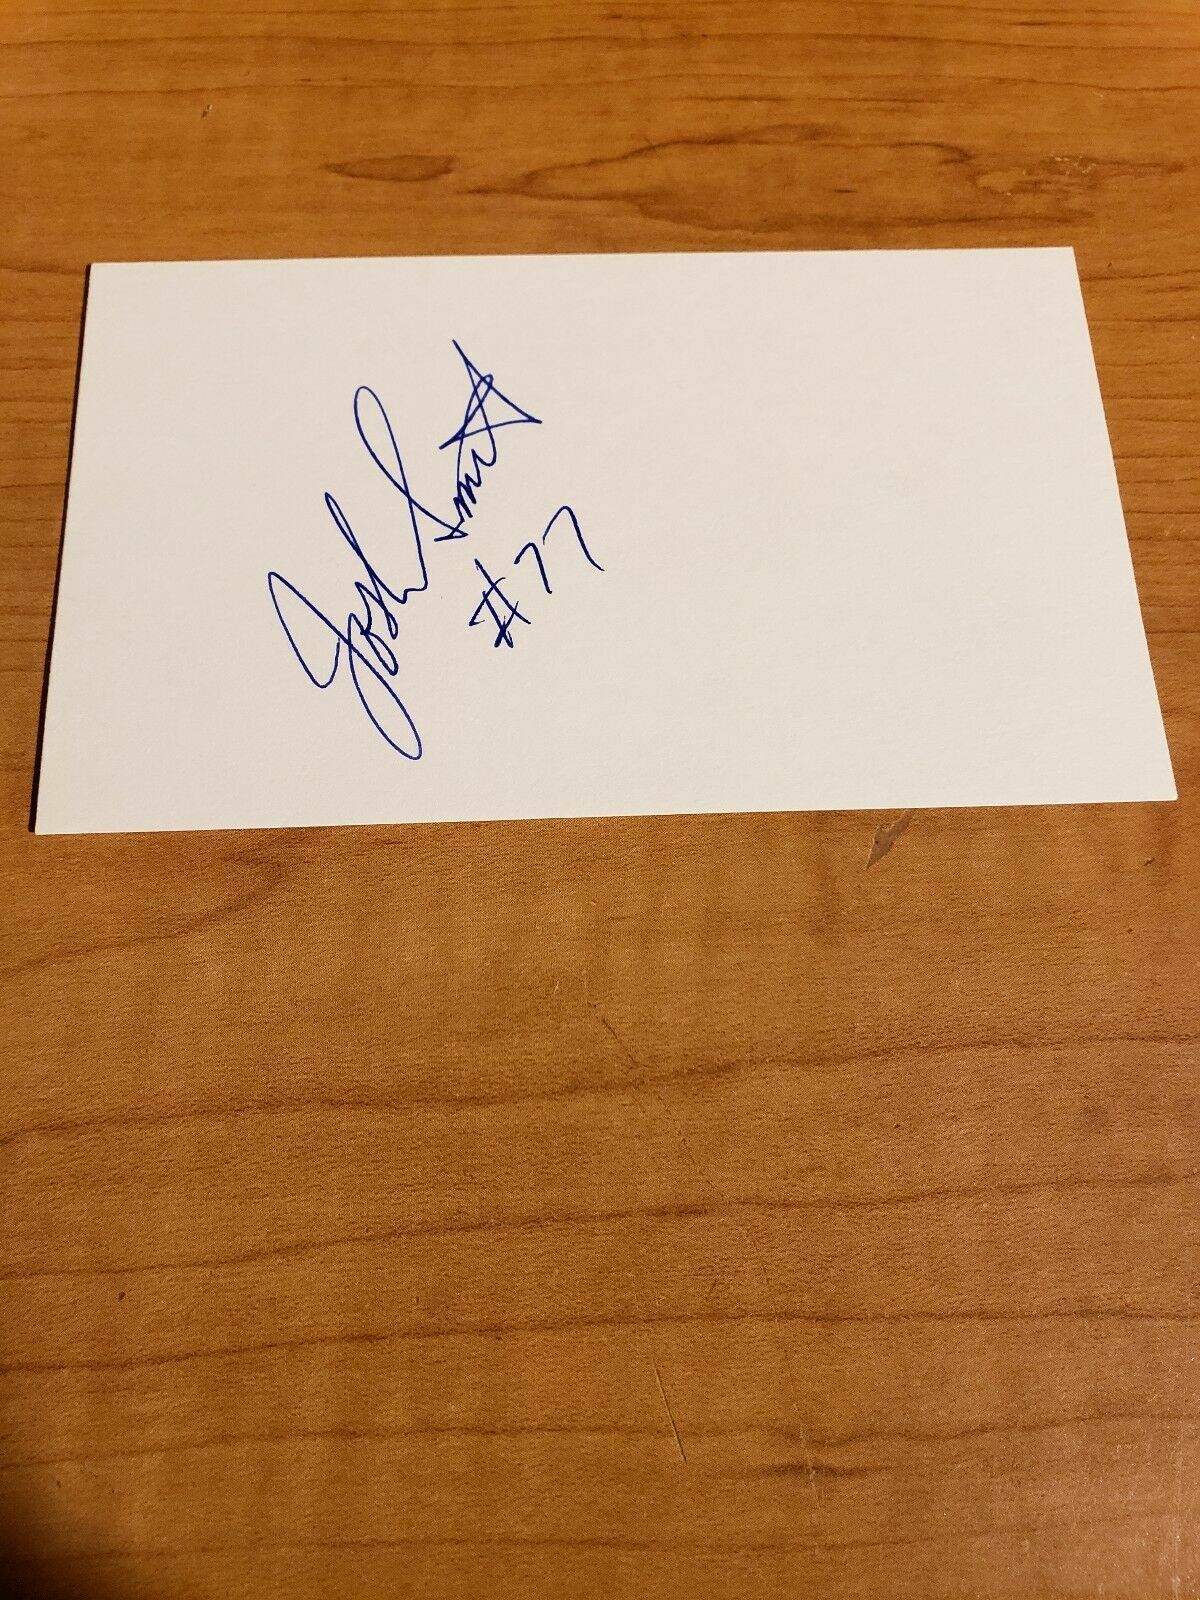 JOSH SMITH - FOOTBALL - AUTHENTIC AUTOGRAPH SIGNED INDEX CARD - A6827